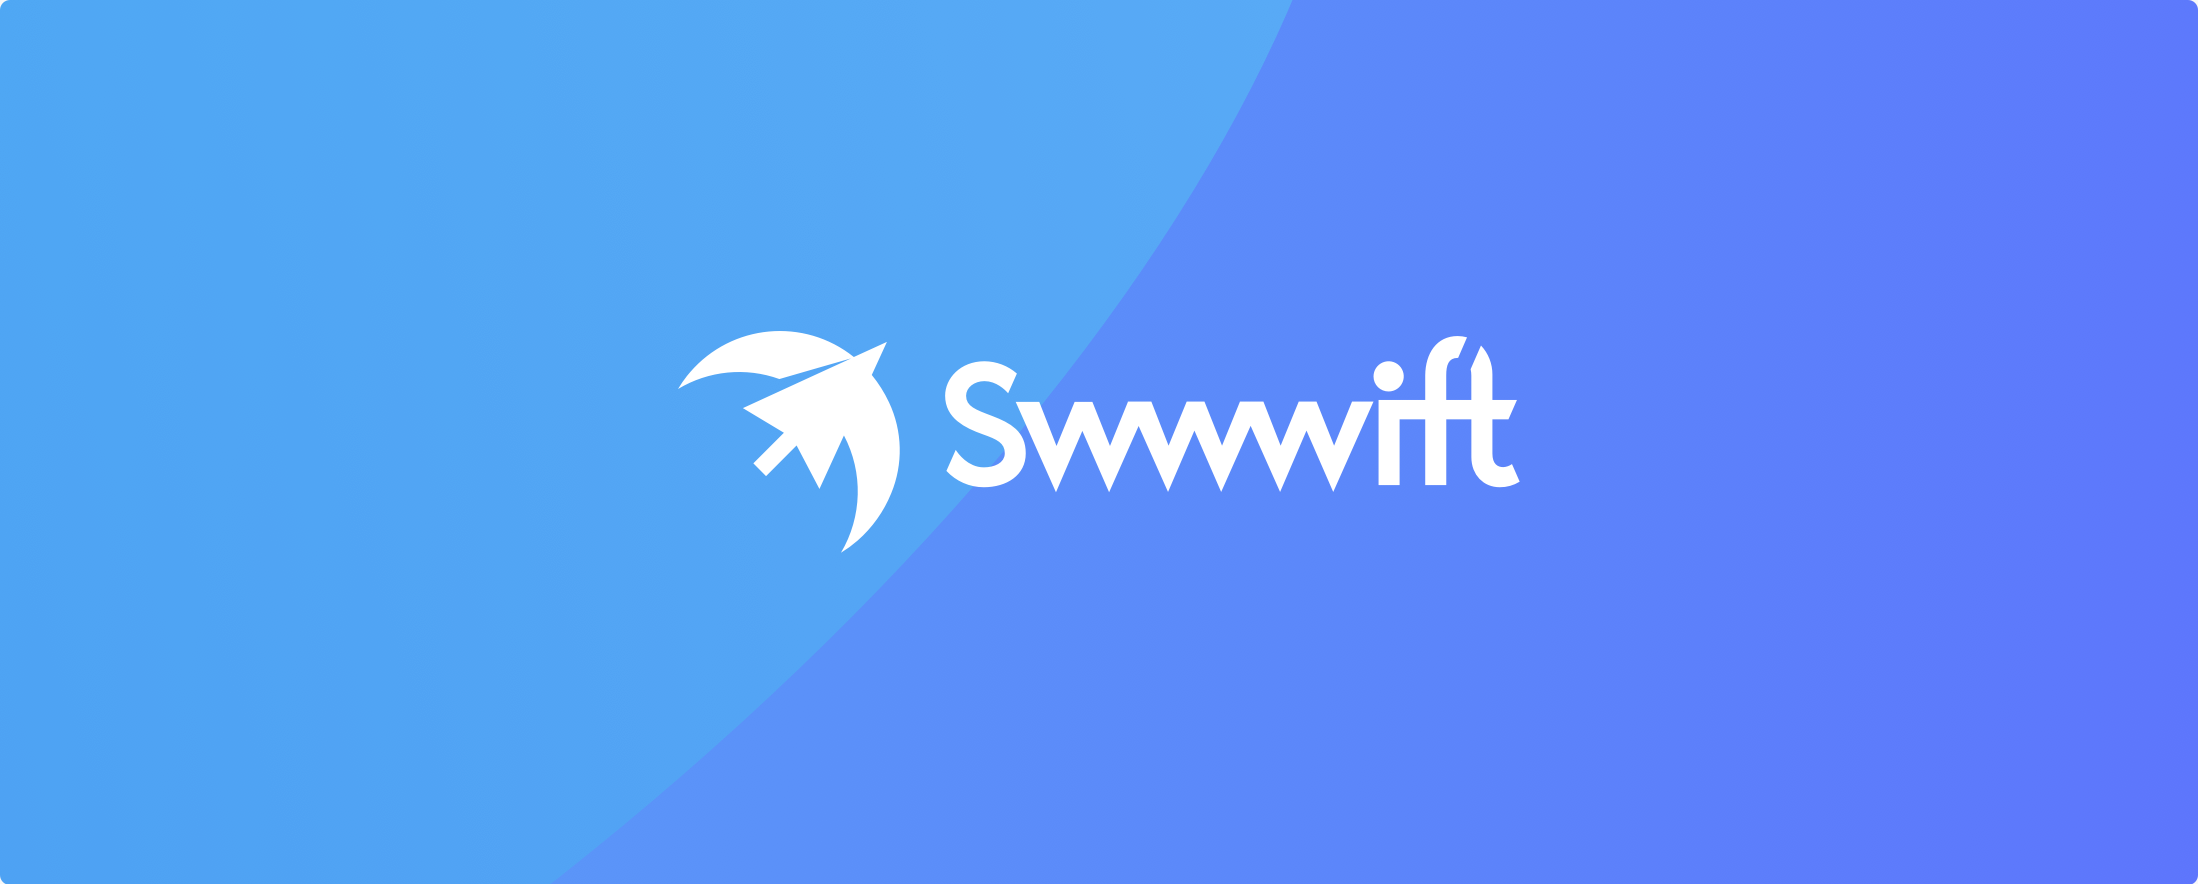 Why we created Swwwift